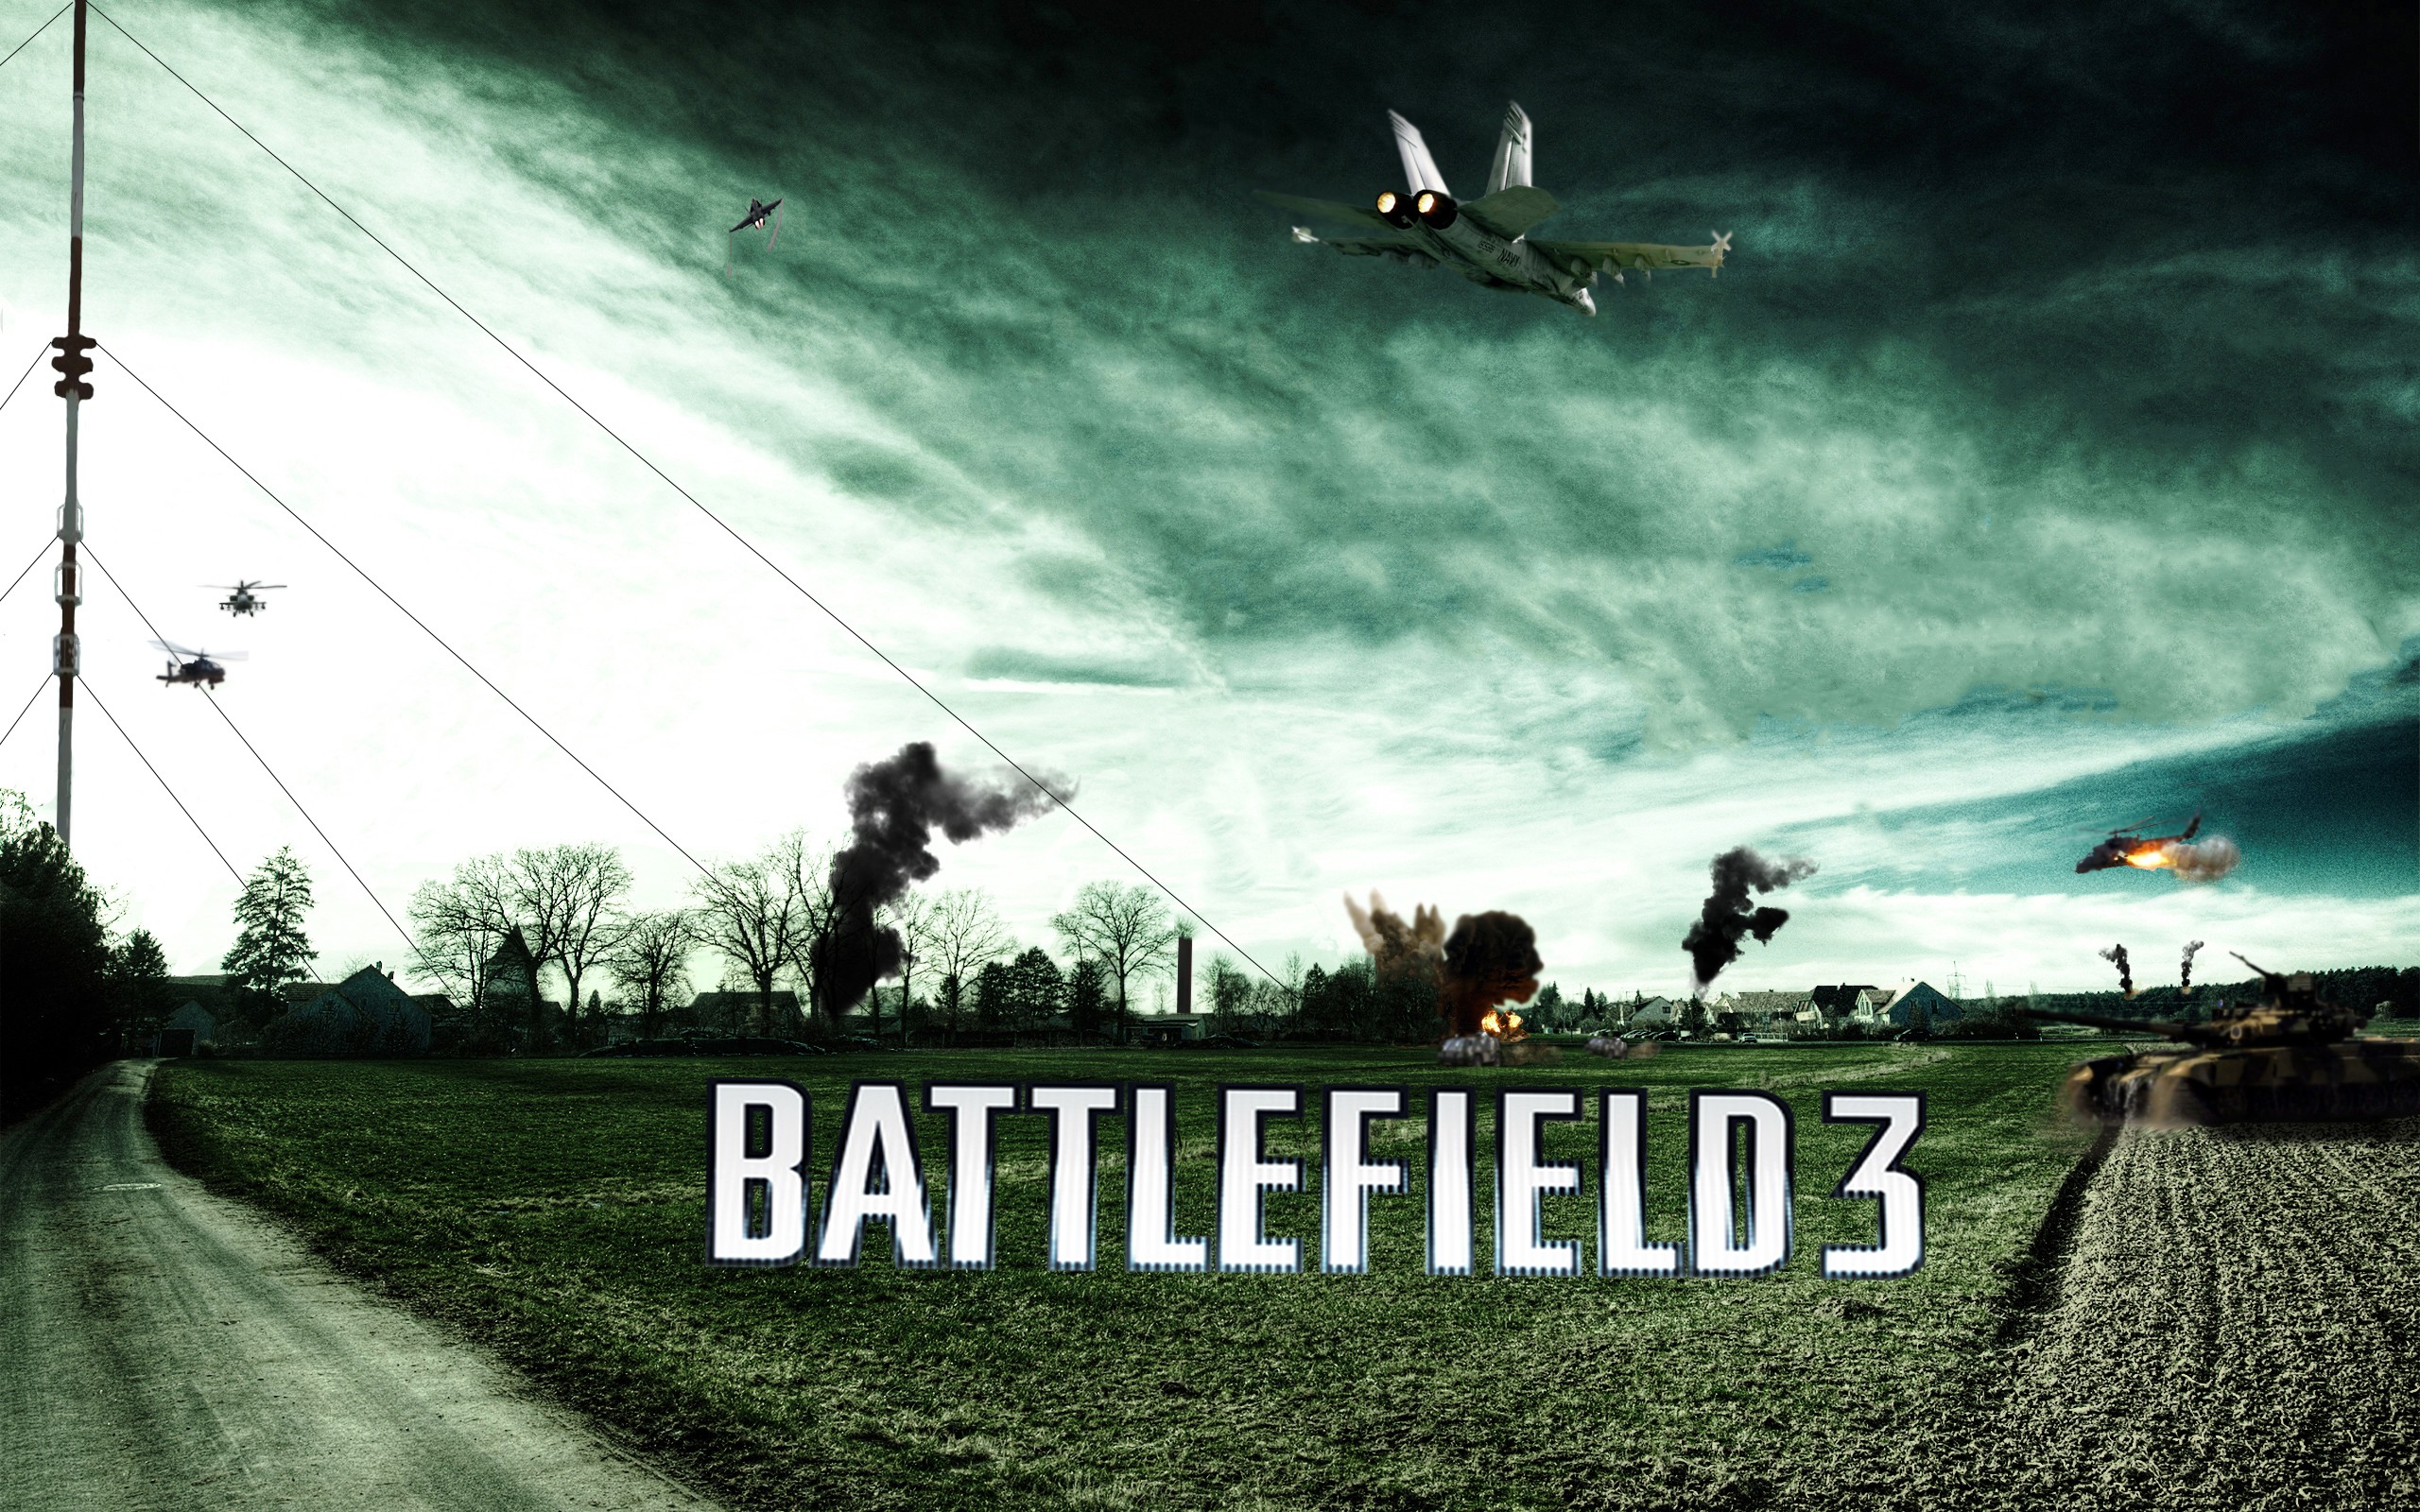 battlefield, Apache, Helicopters, Dice, Hind, T90, Vehicles, Ea, Games, Jet, Aircraft, Battlefield, 3, Caspian, Border, Fighter, Jet Wallpaper